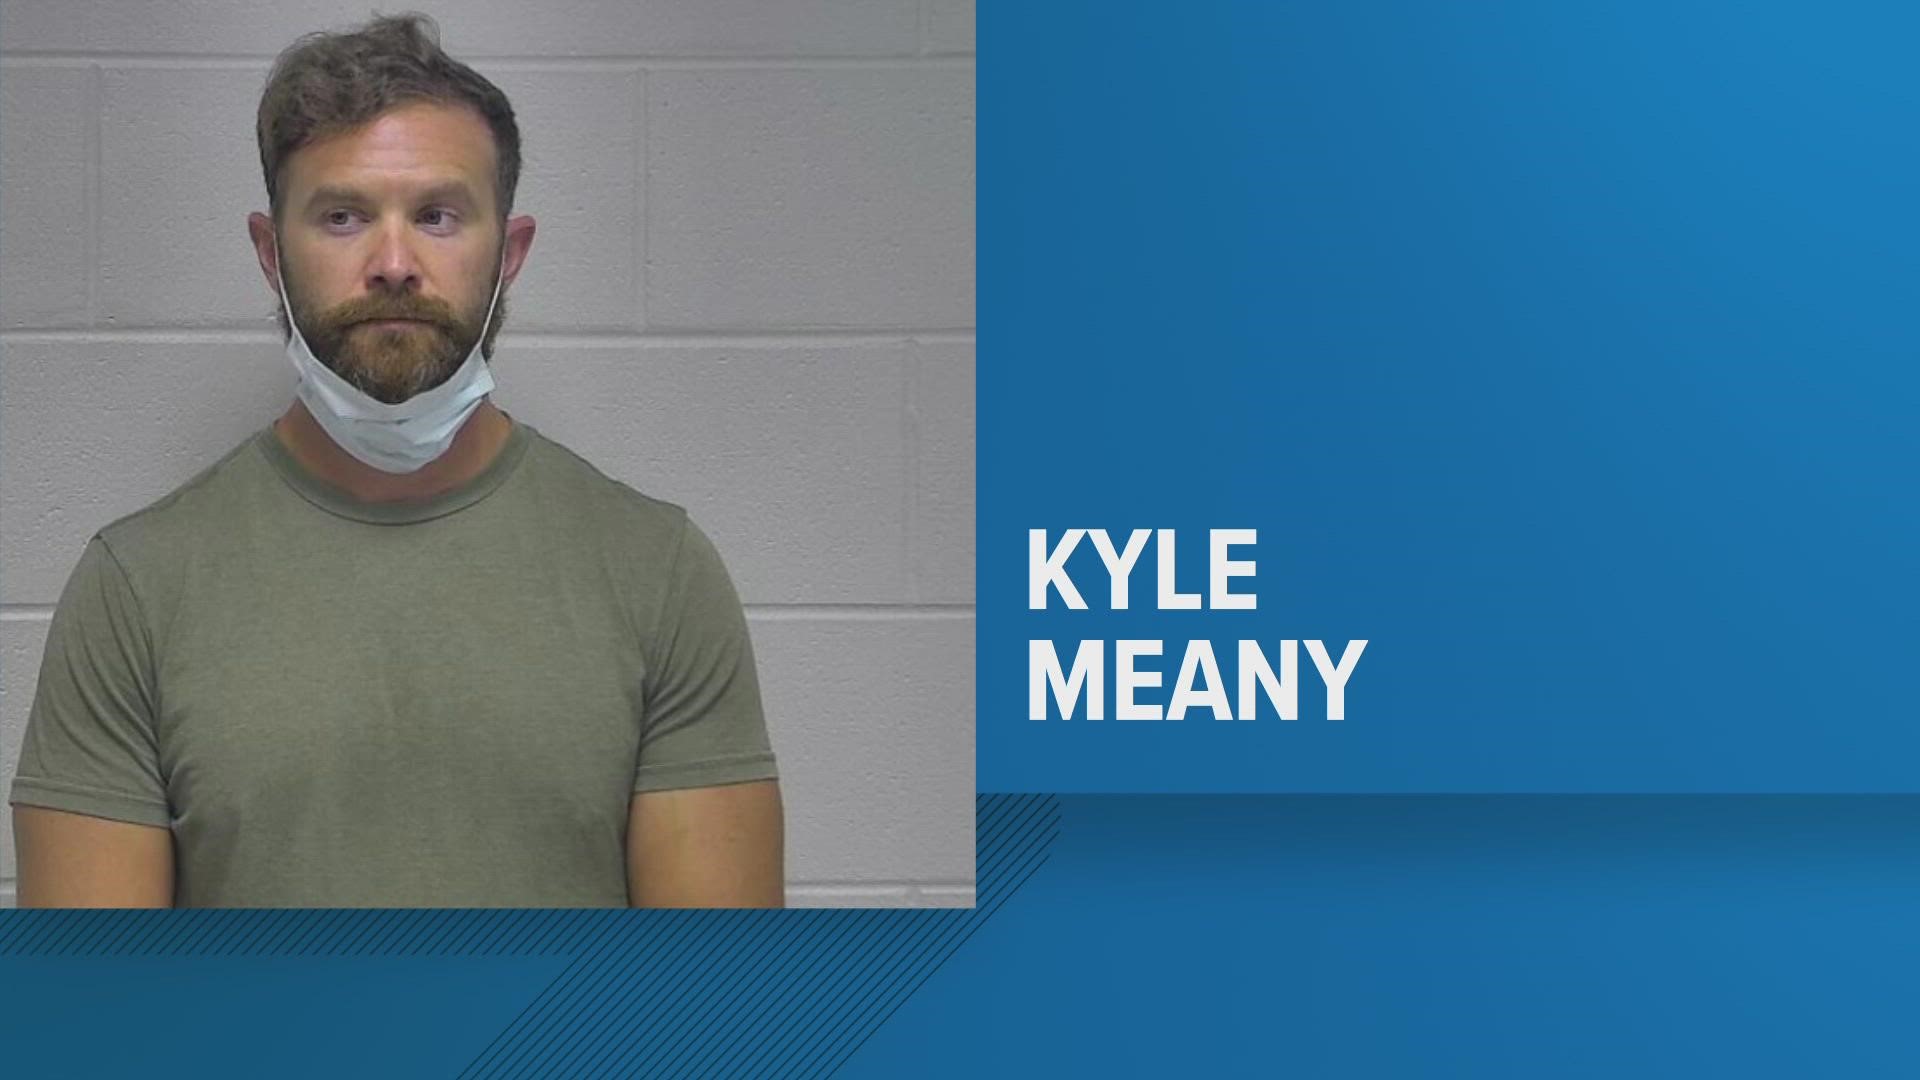 Sgt. Kyle Meany is charged with deprivation of rights and lying to FBI agents in the federal charges related to the Breonna Taylor case.